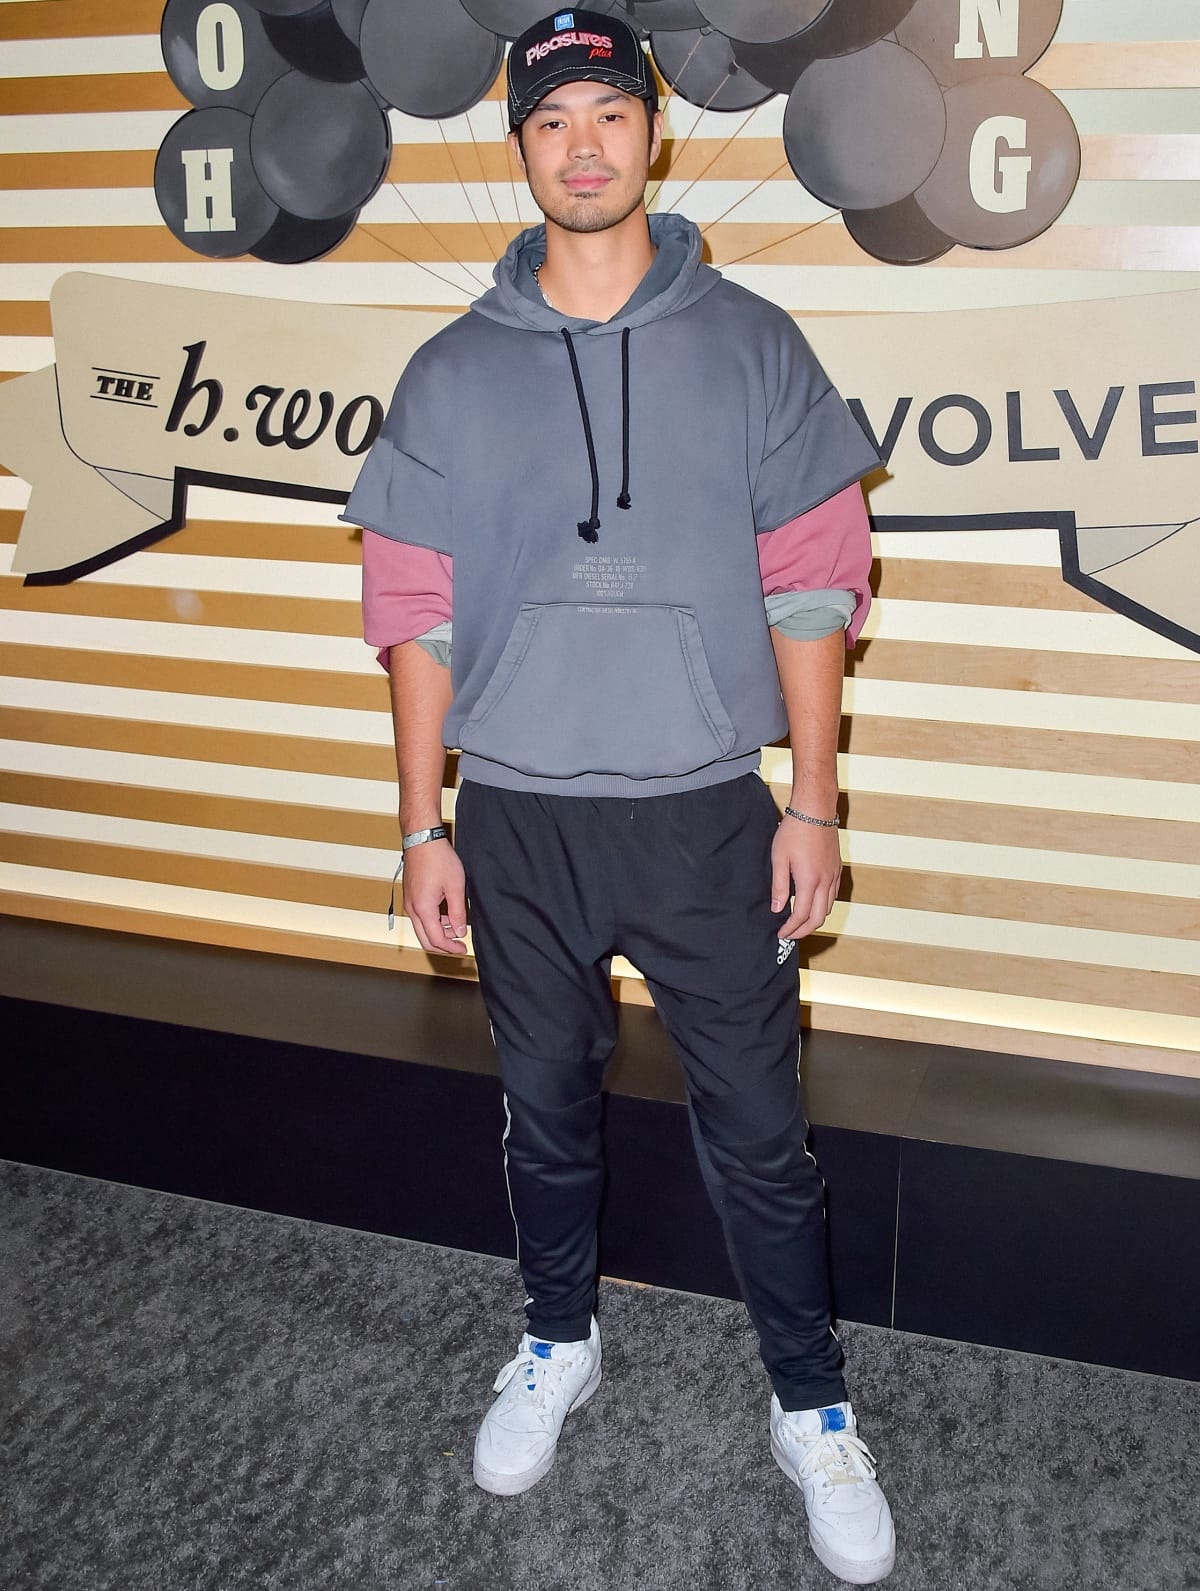 Ross Butler towers at 6 feet and 2 ¼ inches, and he has an estimated net worth of $1 million